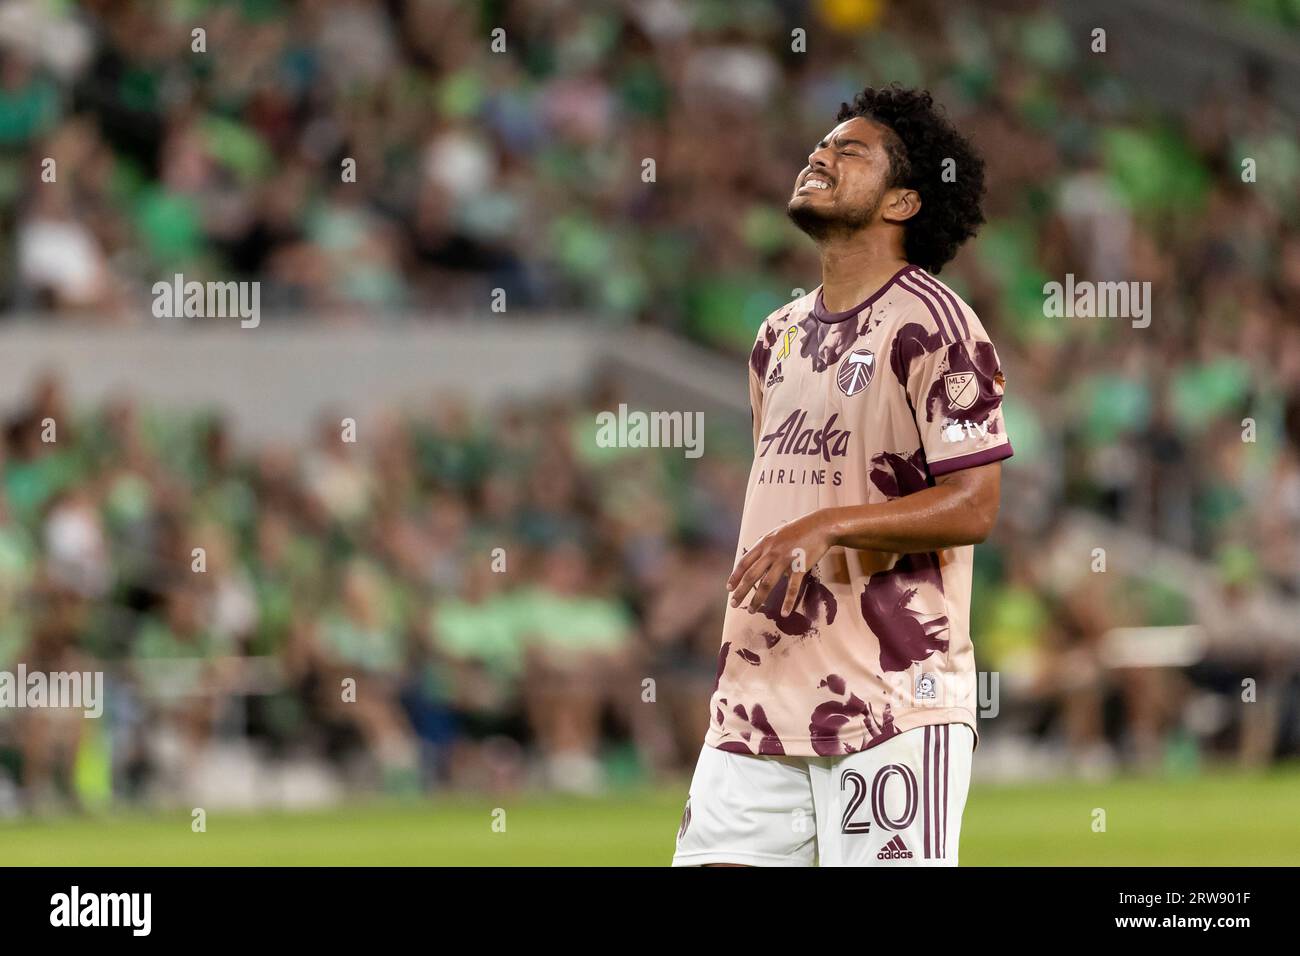 AUSTIN, TX - SEPTEMBER 17: Portland Timbers midfielder Evander (20) shows  his frustration after his shot on goal is saved during the MLS match  between Austin FC and Portland Timbers on September